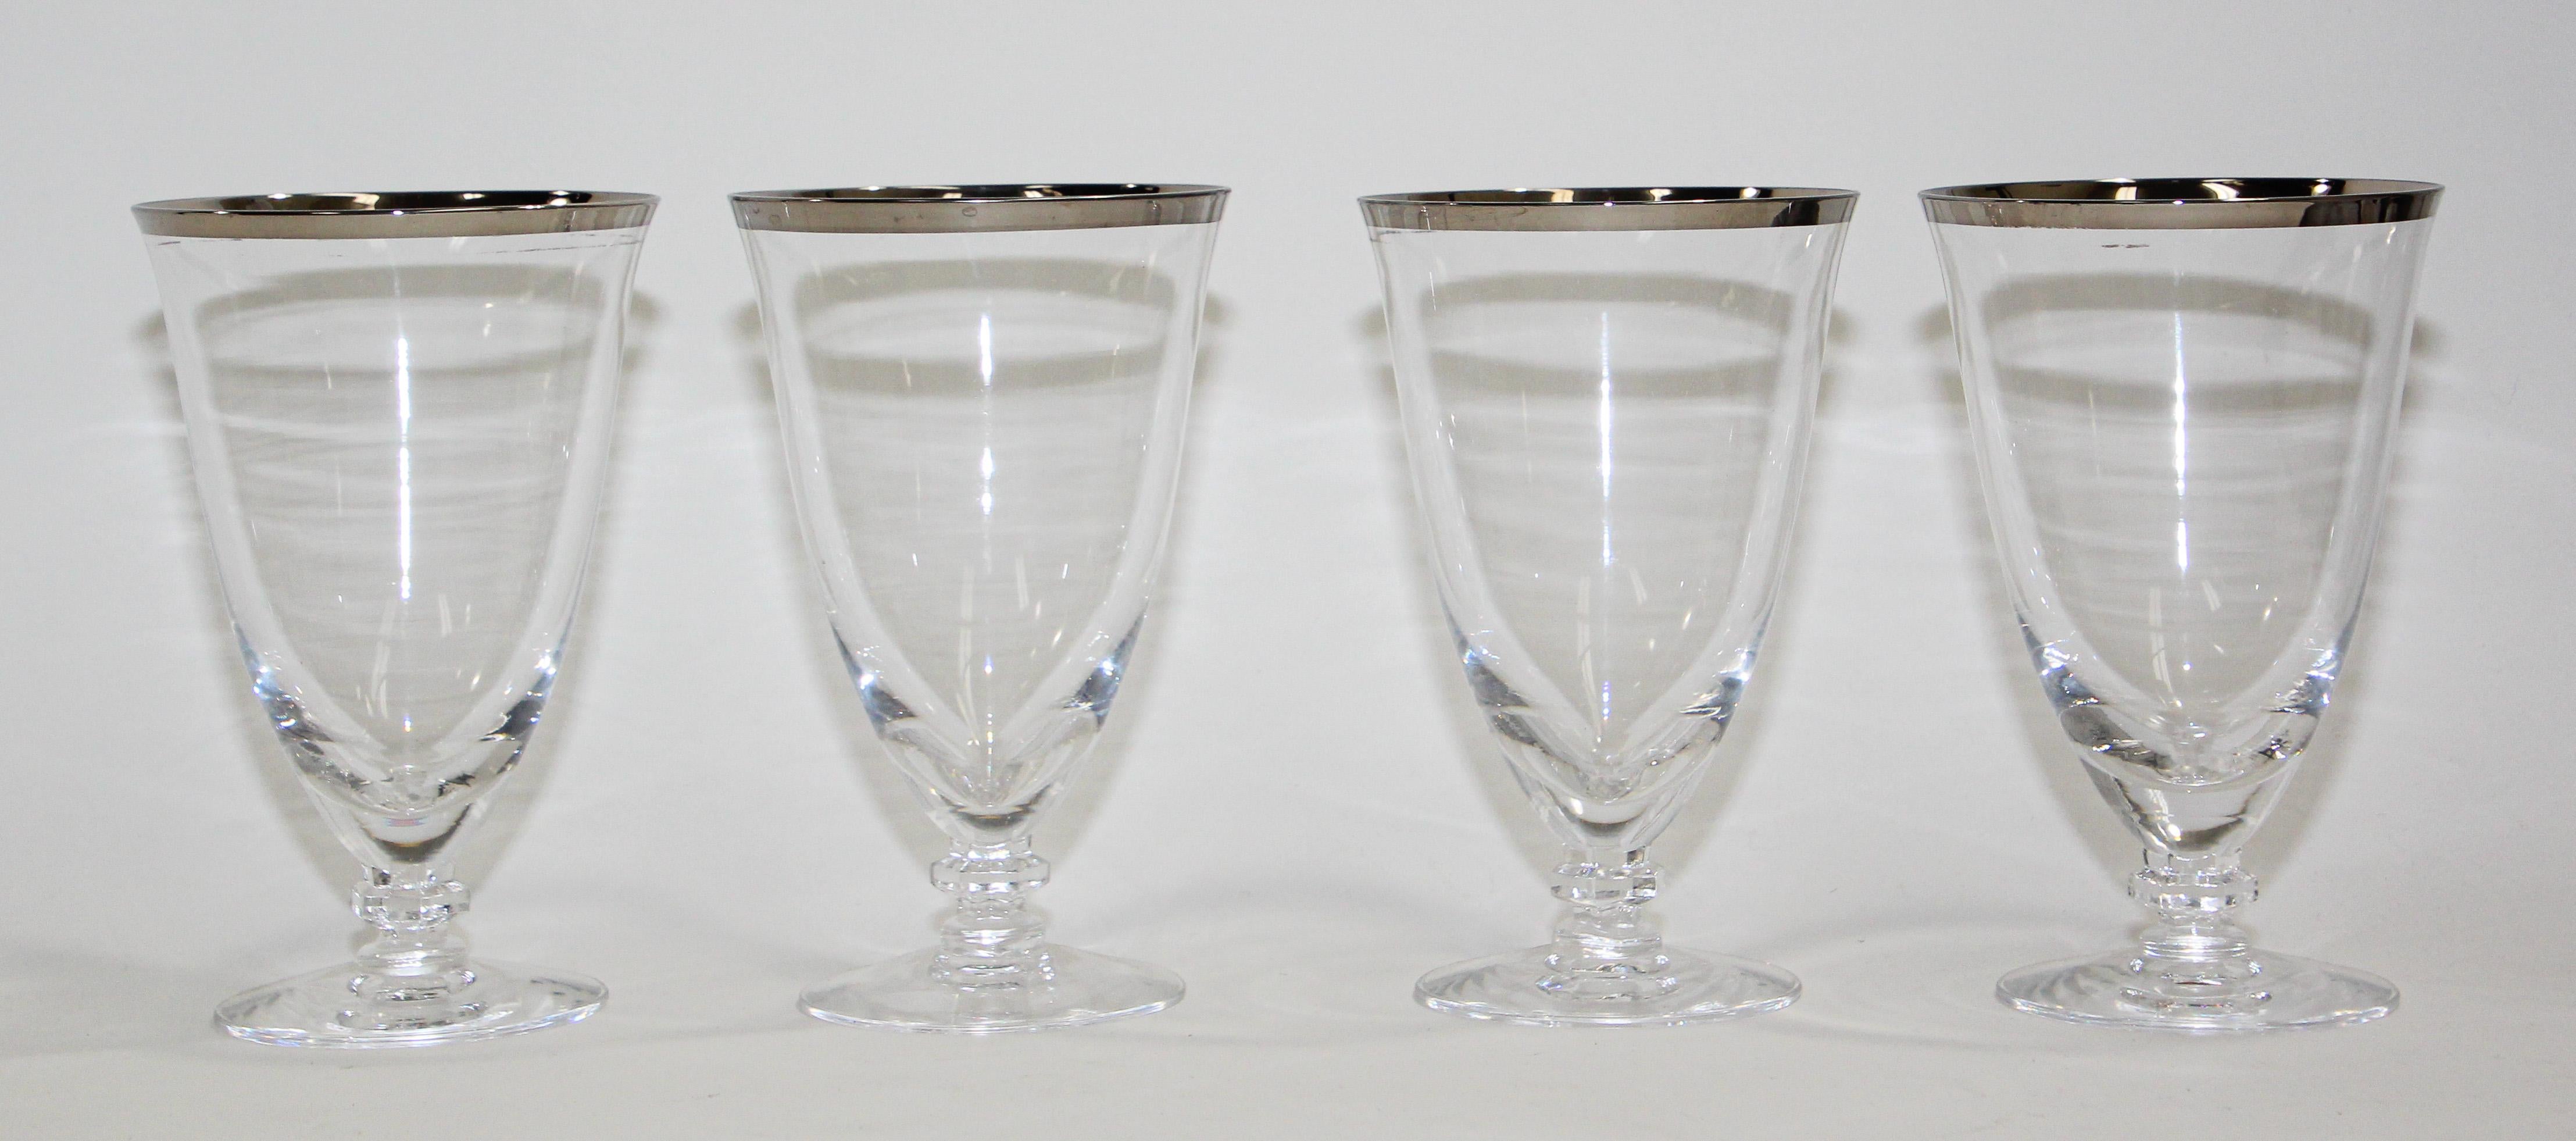 Vintage Crystal footed drinking glasses, goblets.
Crystal glasses with platinum silver rim. 
These crystal champagne glasses are a versatile home bar essential and, classic set serves today's favorite beverage, can be used as cocktail glasses,